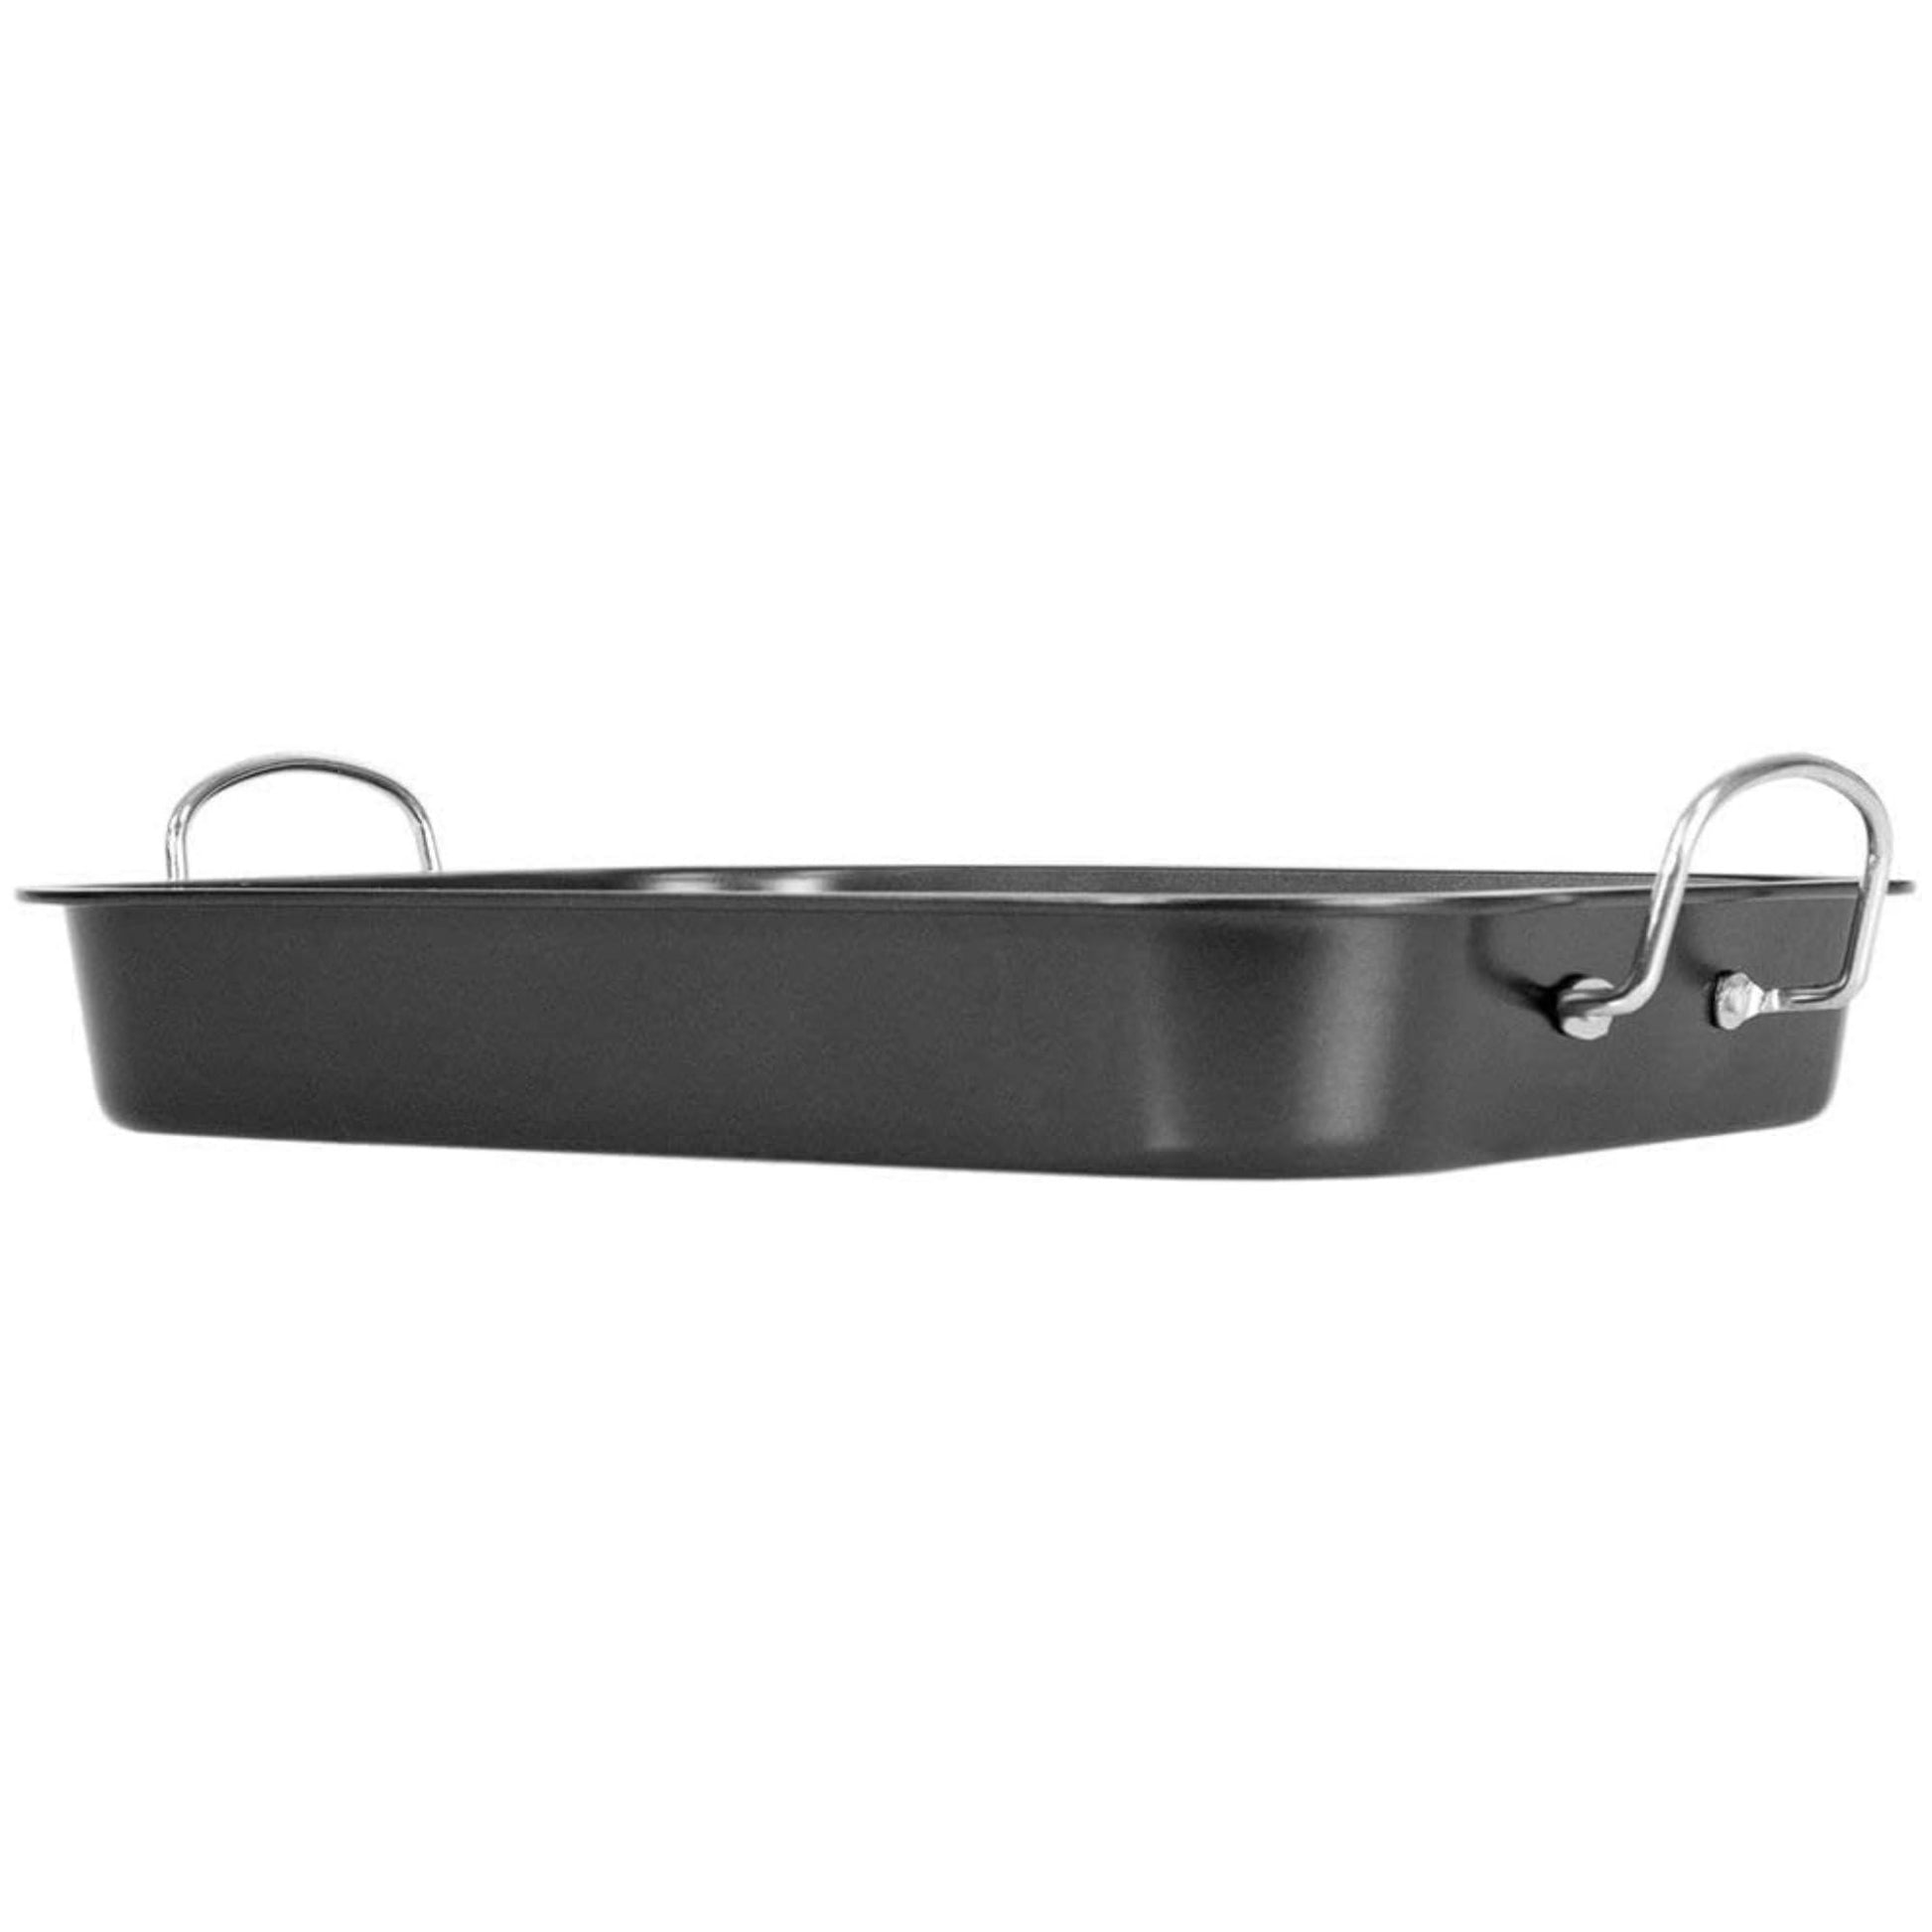 Deluxe Non Stick Roaster Pan/Turkey Roasting Pan with Rack and Handles, Excellent Broiler Pan for Turkeys, Hams and Chickens 14.5" x 11.5", Black - CookCave